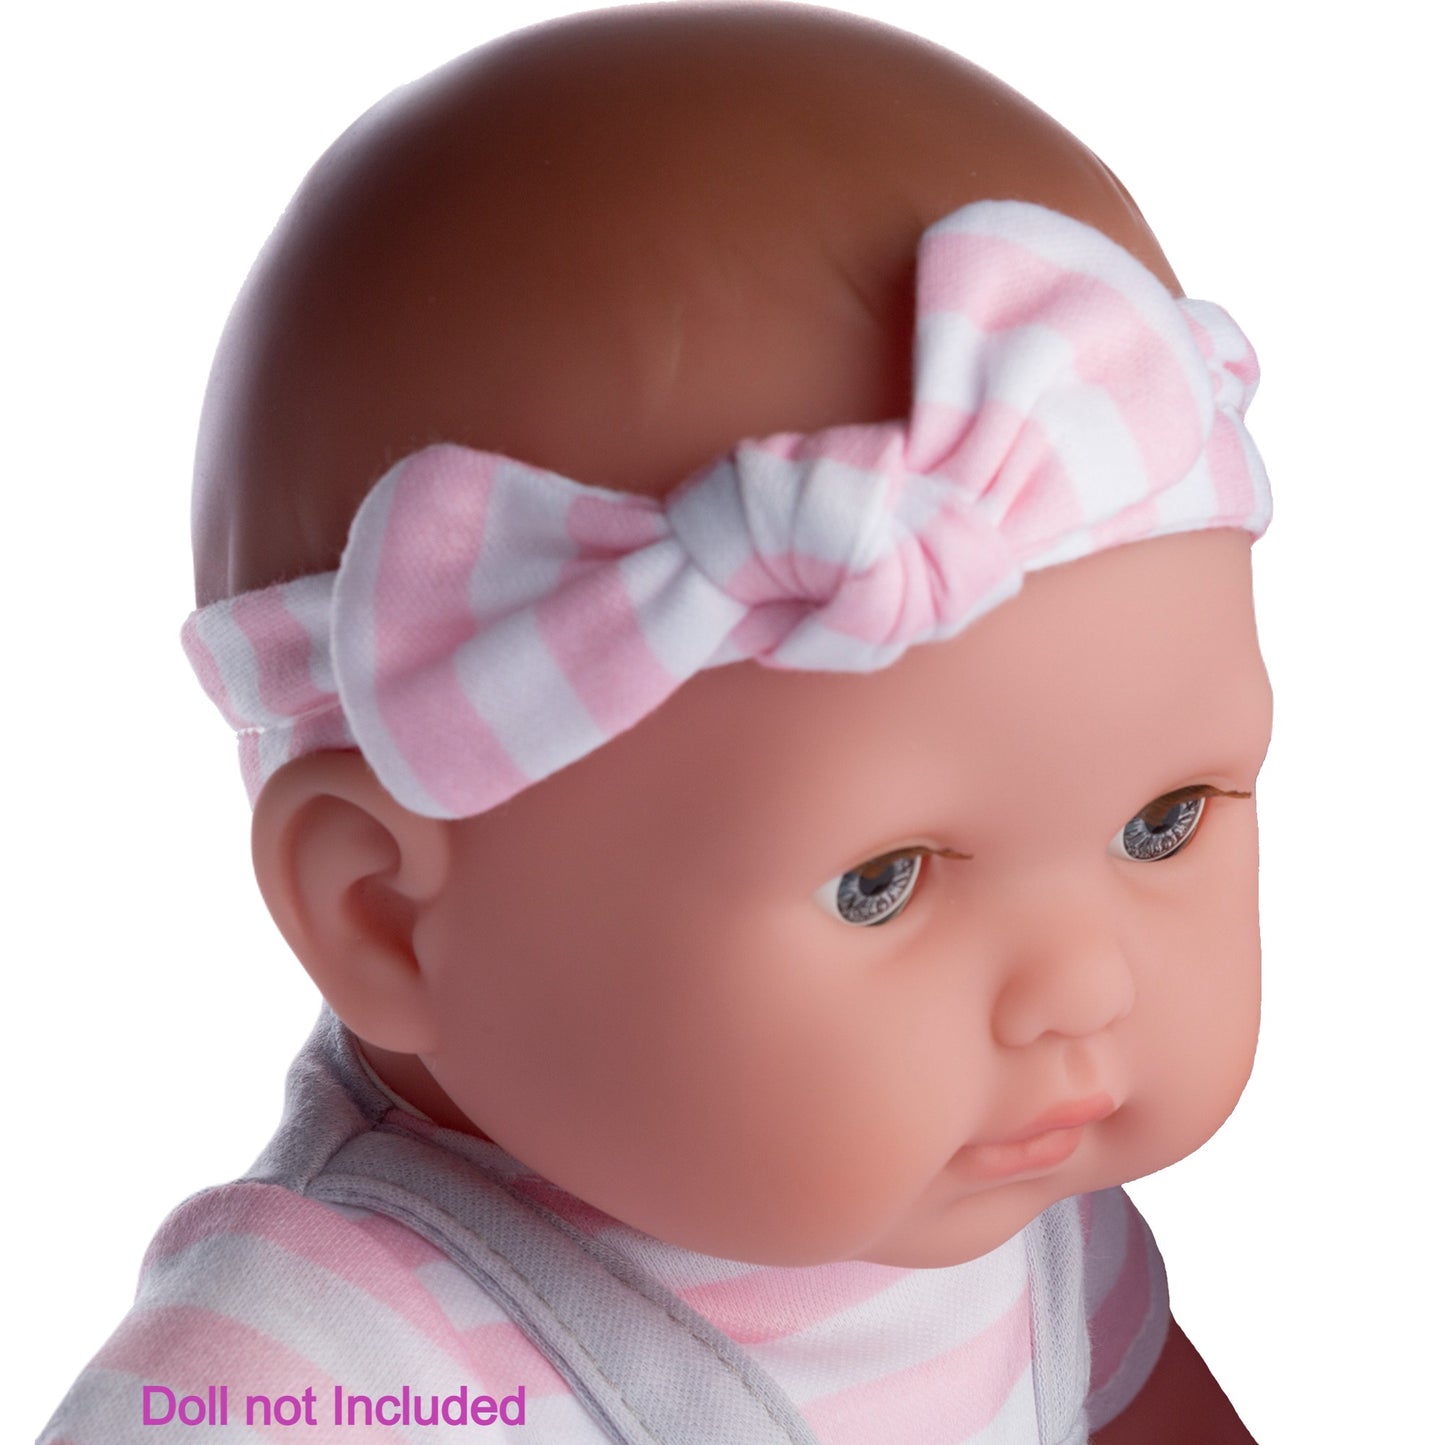 JC Toys Berenguer Boutique Baby Doll Outfit Gray Overall Shorts with Pink Stripes Includes Headband and Booties